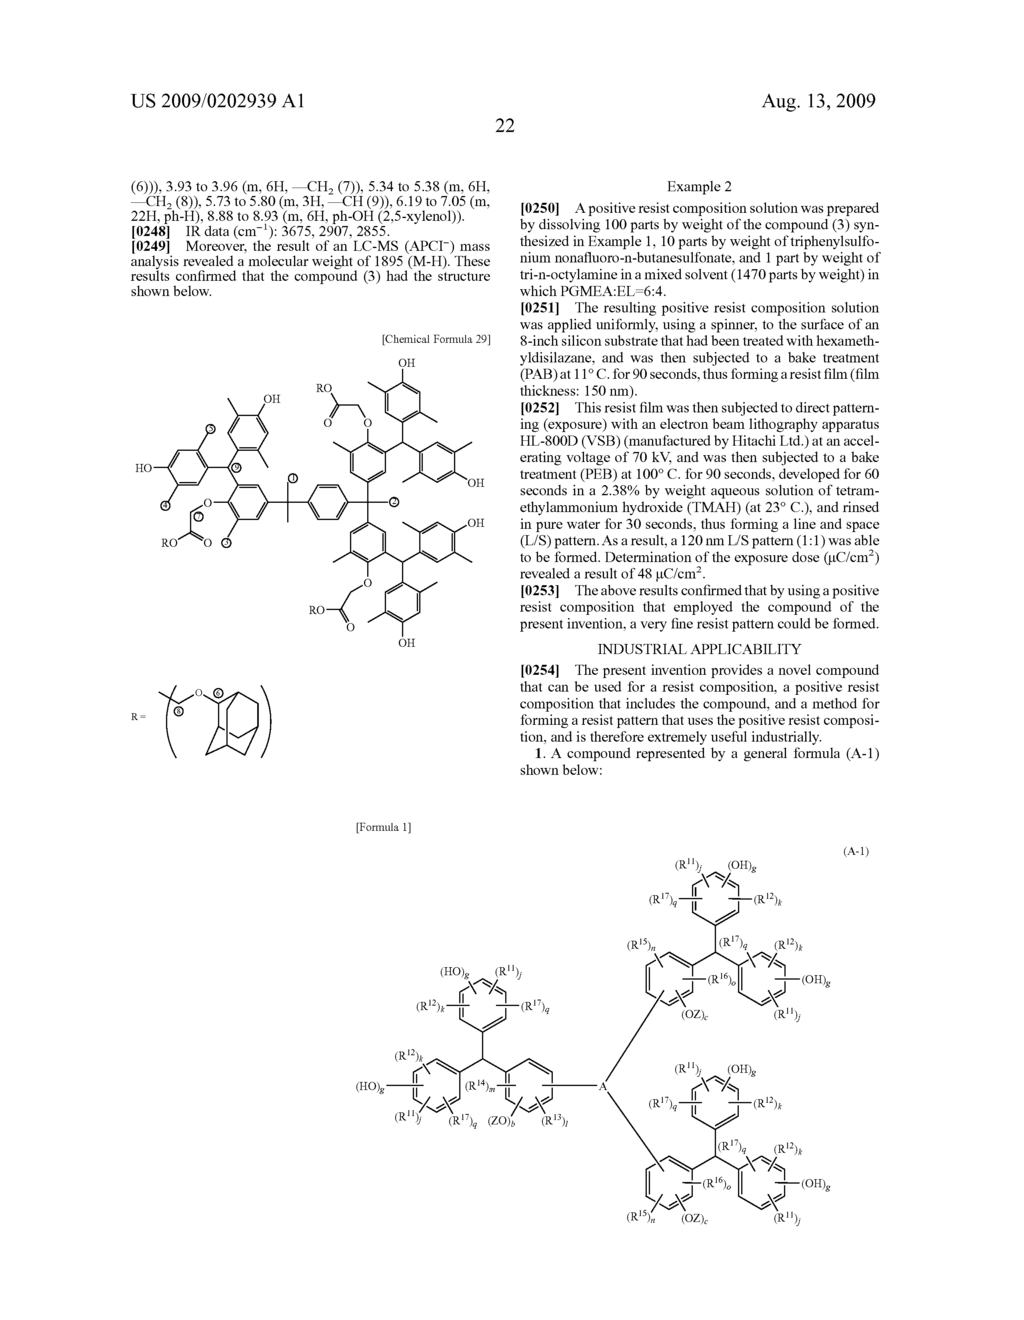 COMPOUND, POSITIVE RESIST COMPOSITION AND METHOD FOR FORMING RESIST PATTERN - diagram, schematic, and image 23